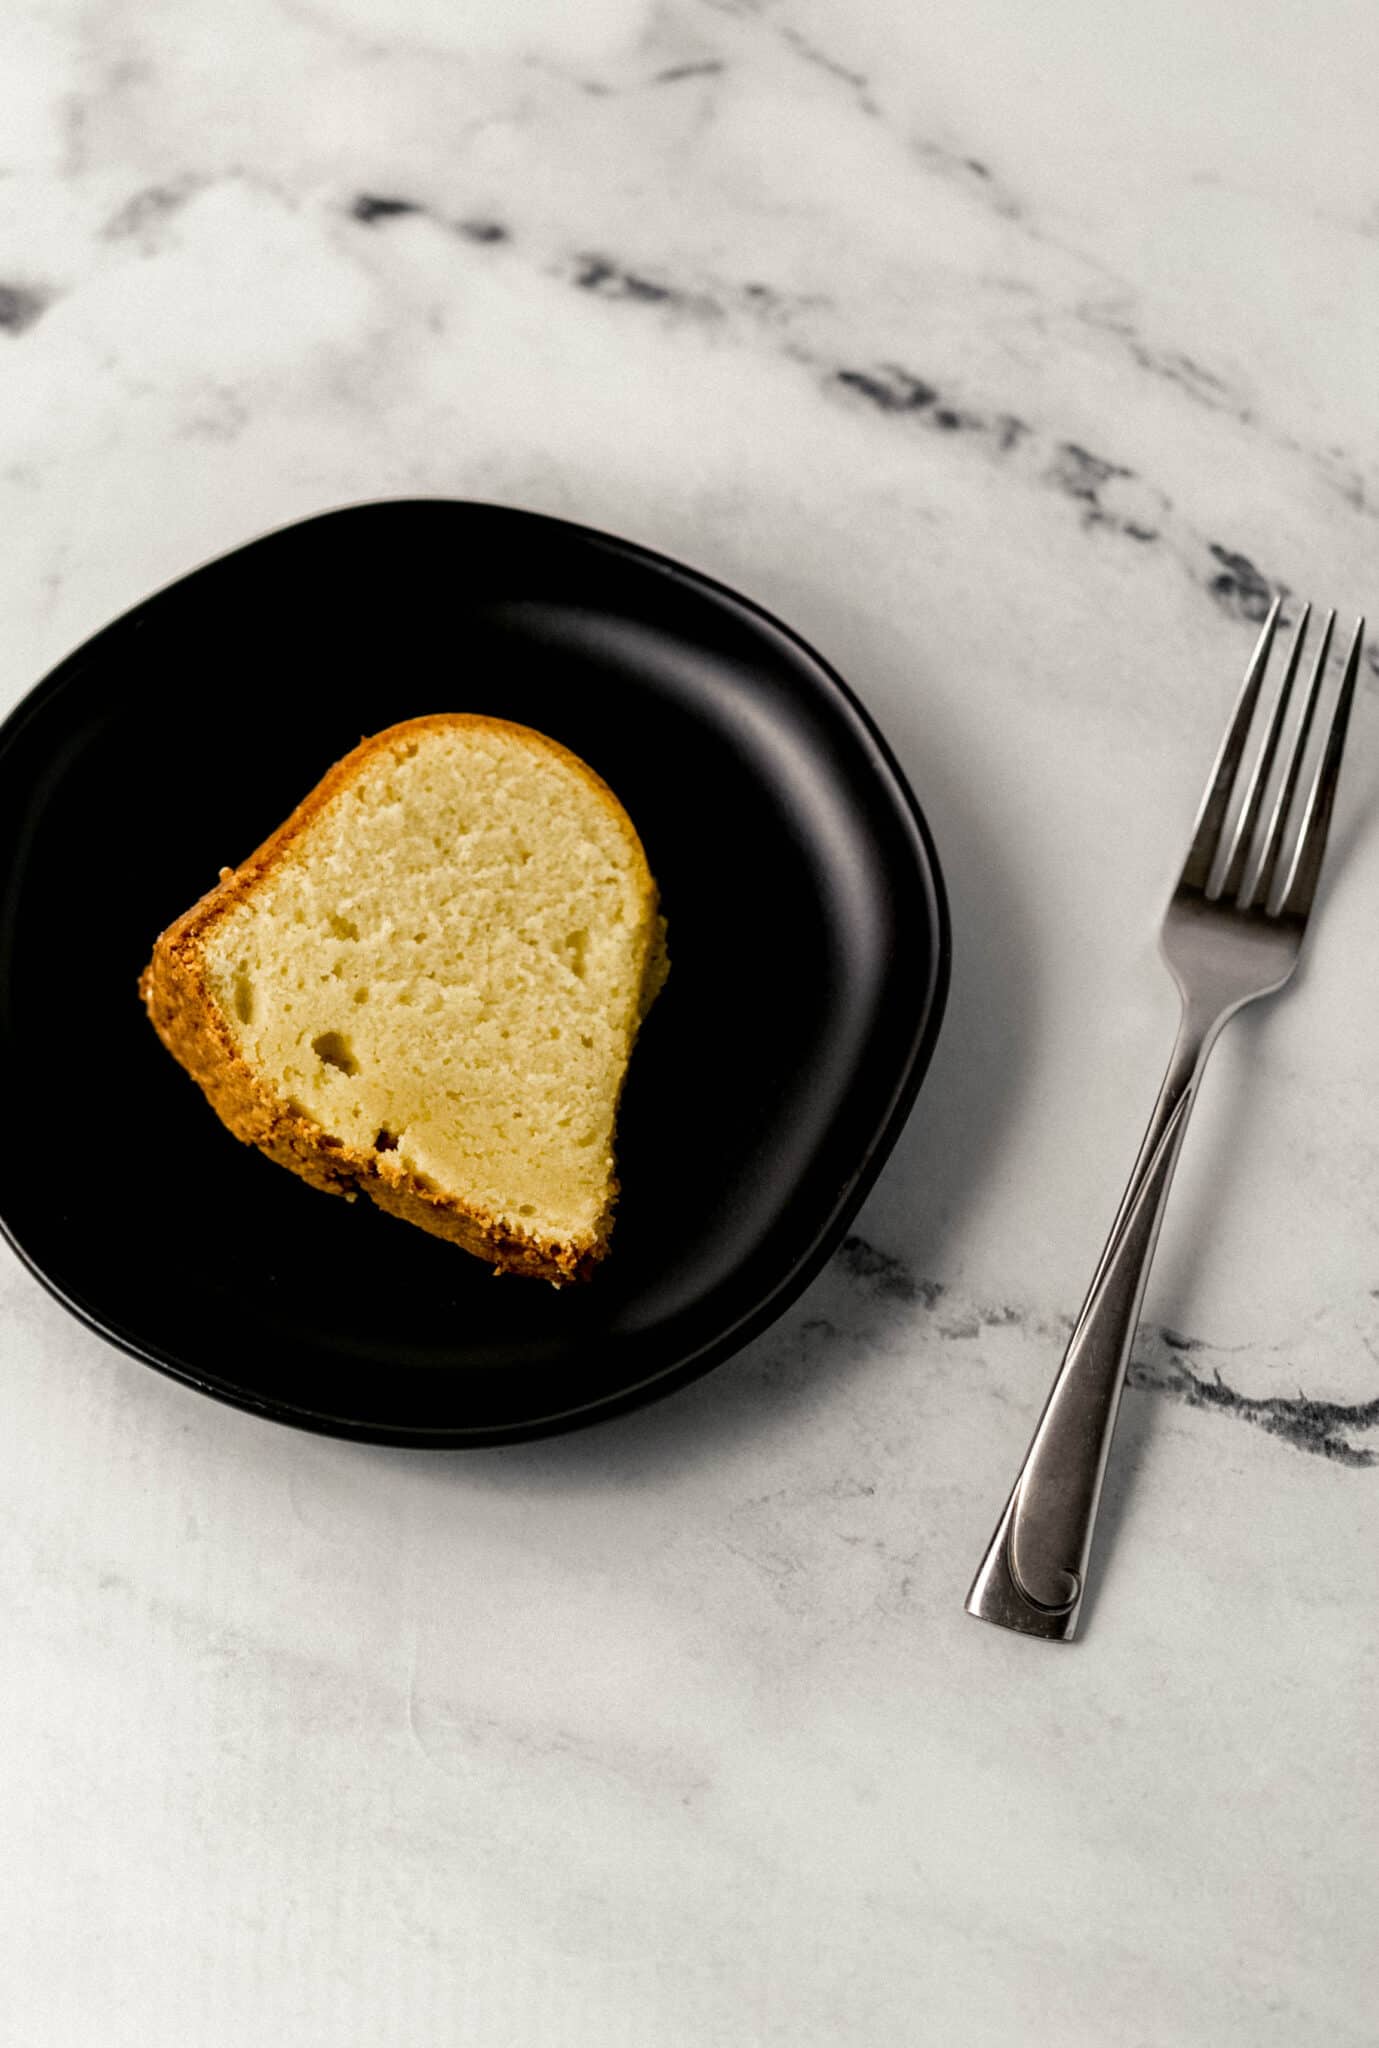 slice of cake on black plate with a fork beside it